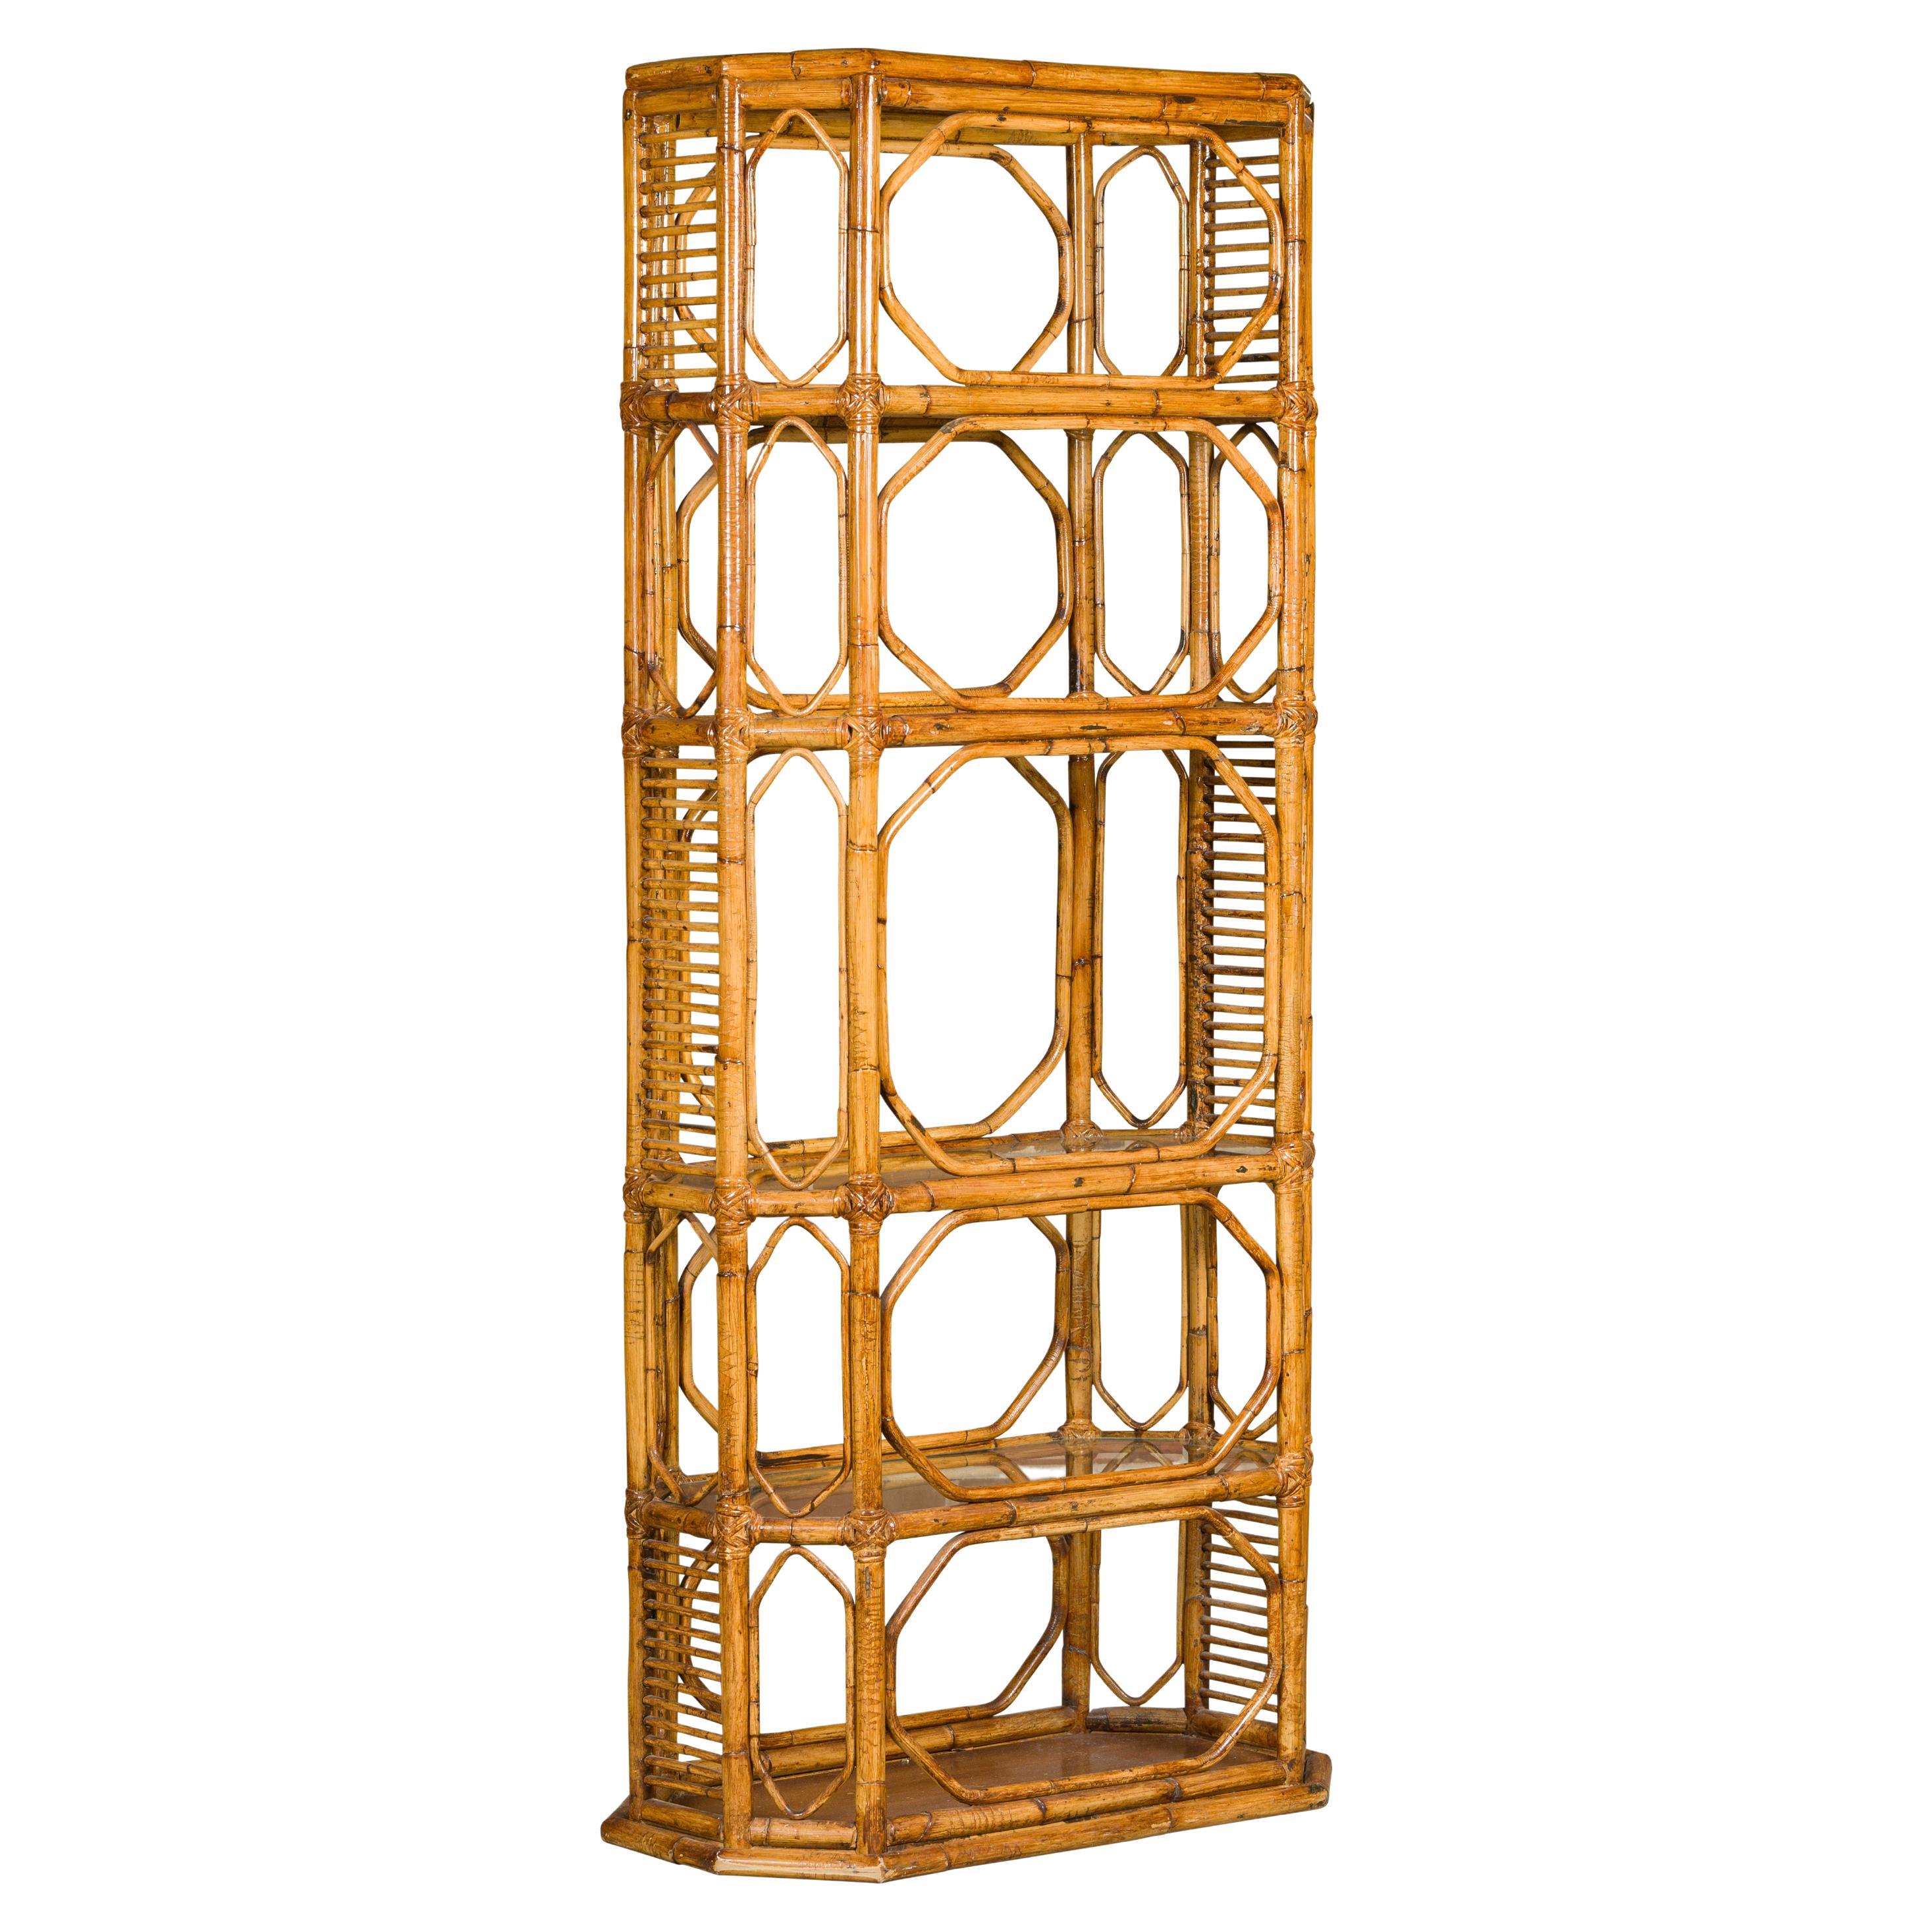 Midcentury Bamboo and Glass Etagère with Five Shelves and Geometric Accents For Sale